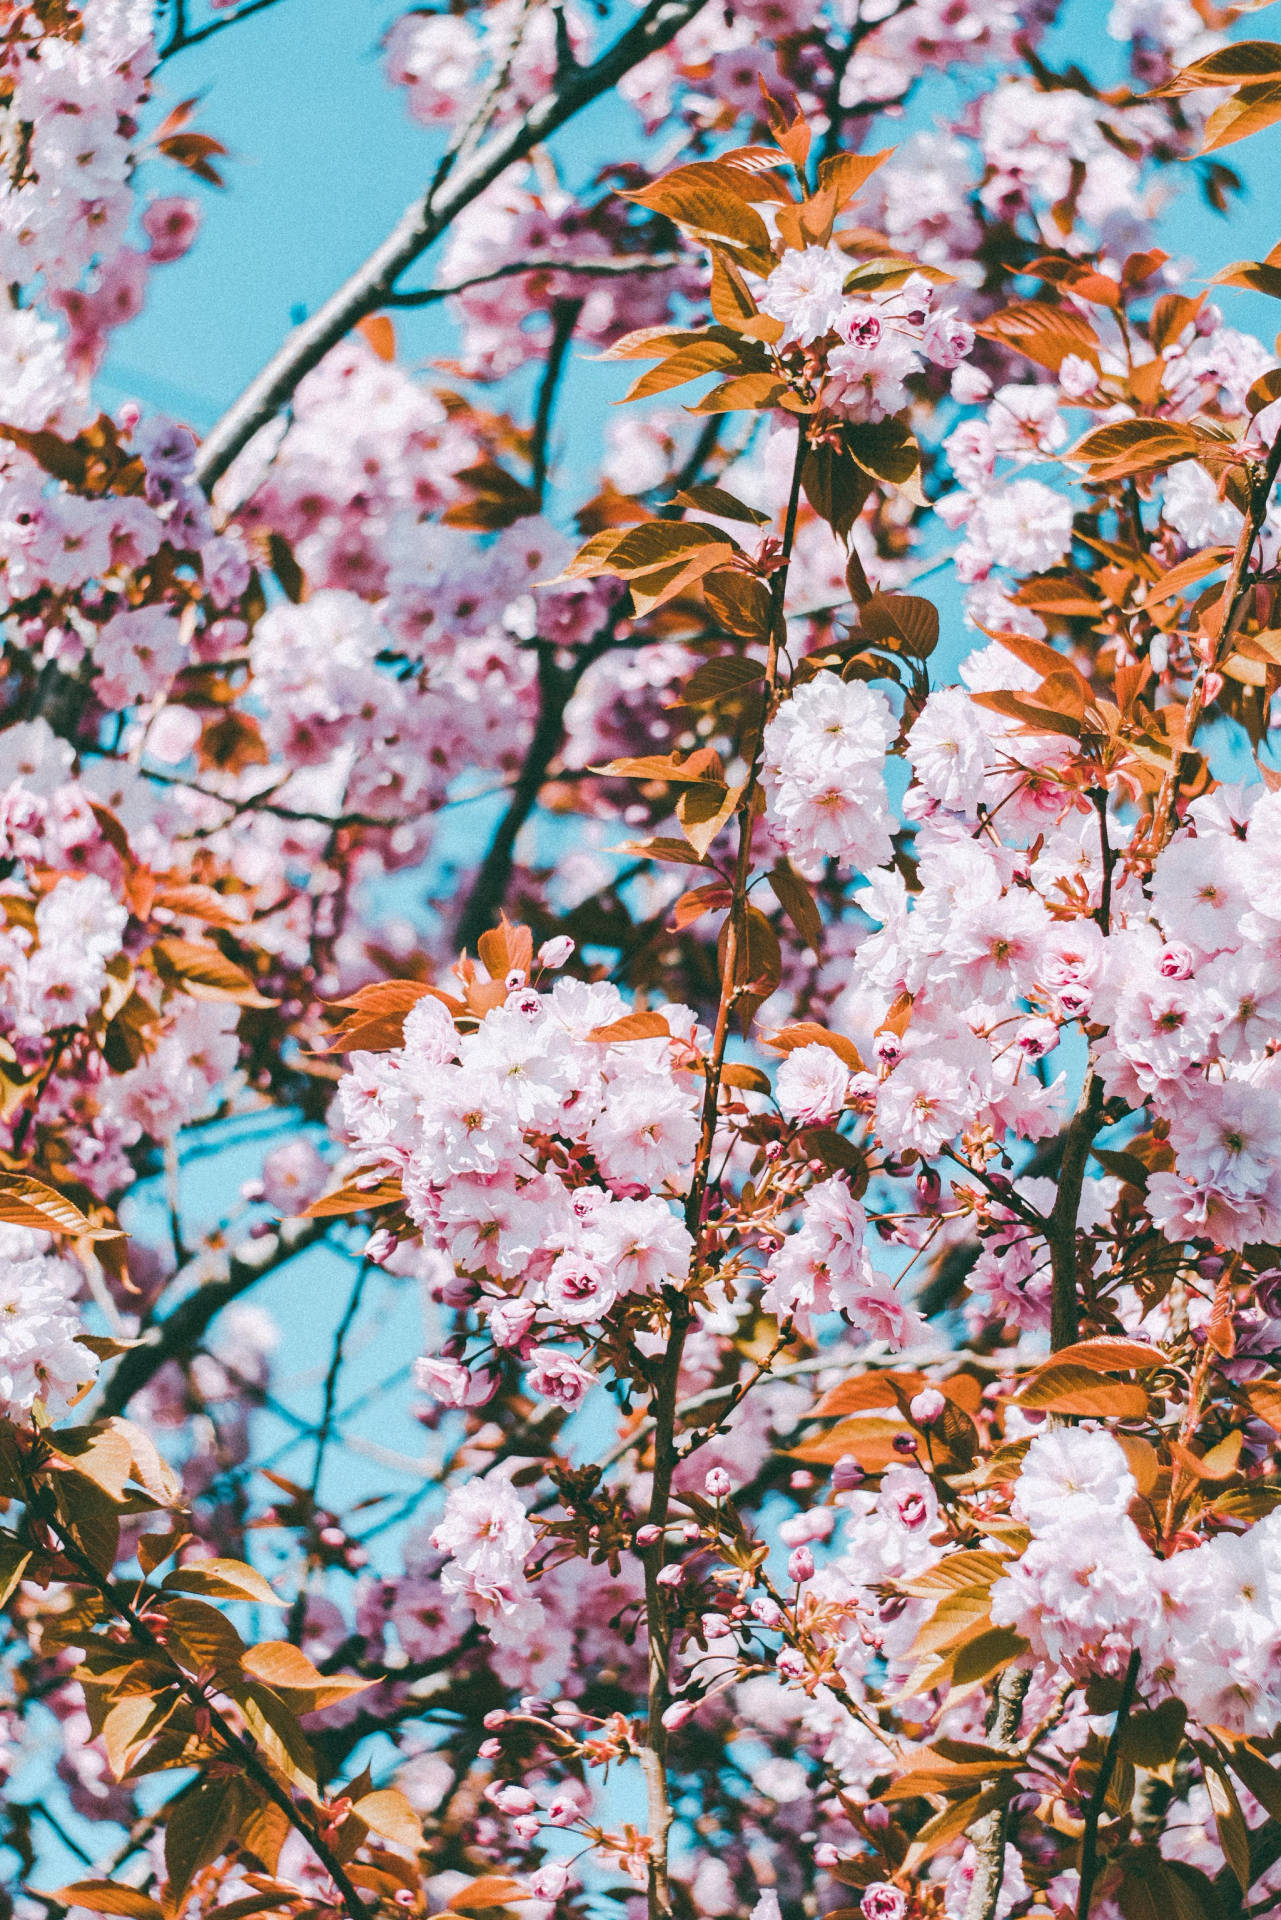 Iphone 11 Pro Max 4k Cherry Blossoms